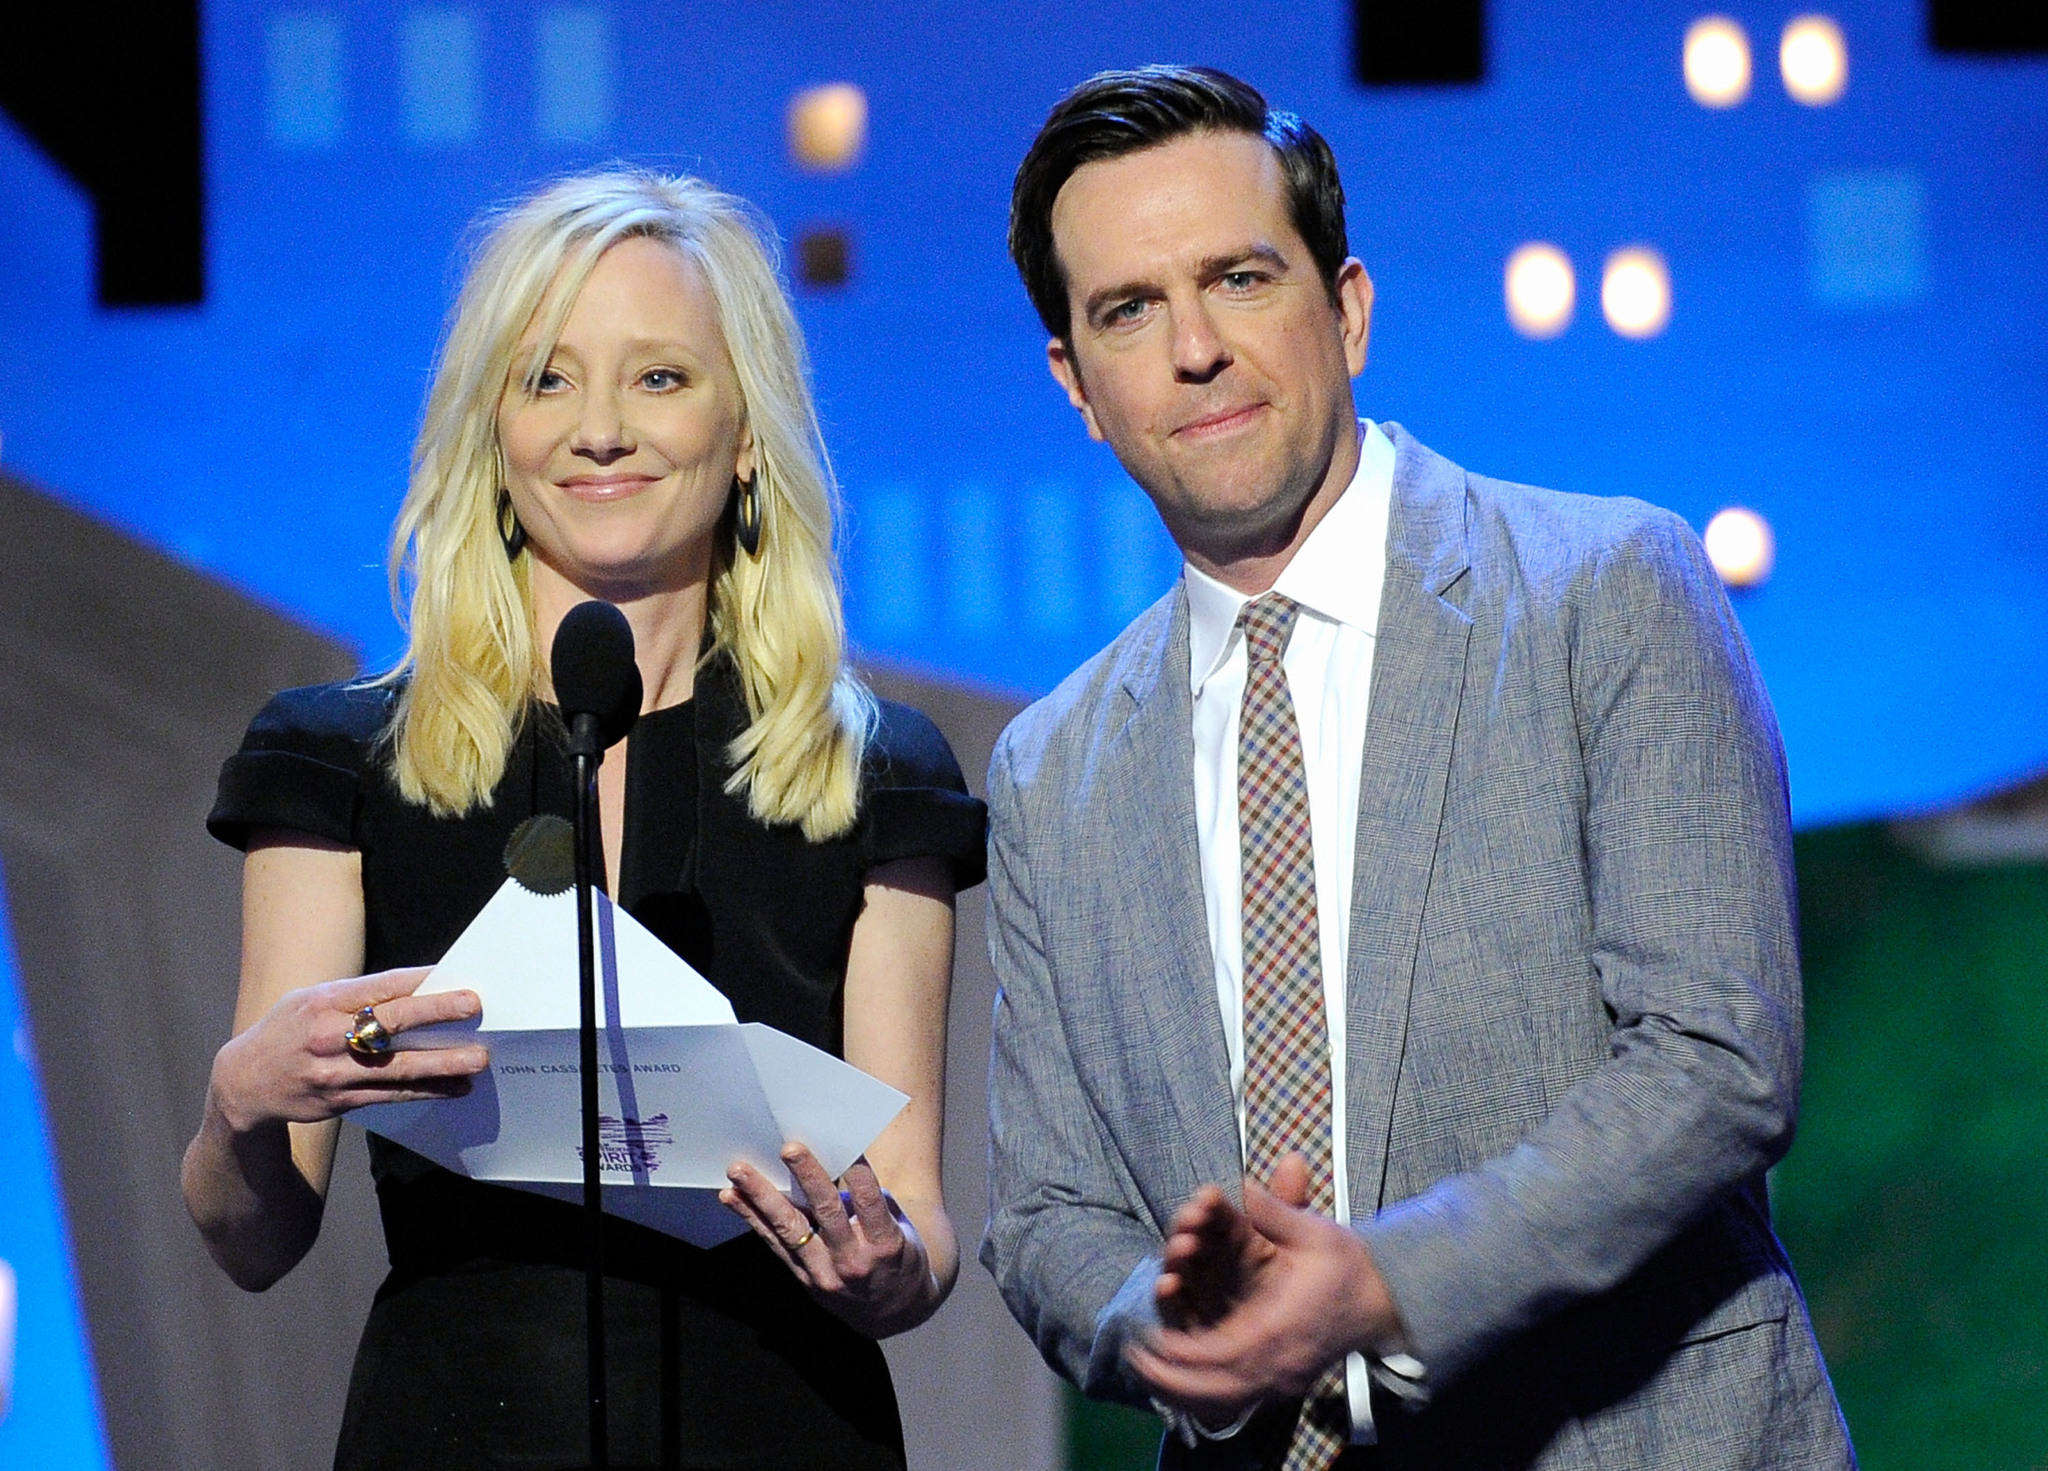 Anne Heche and Ed Helms